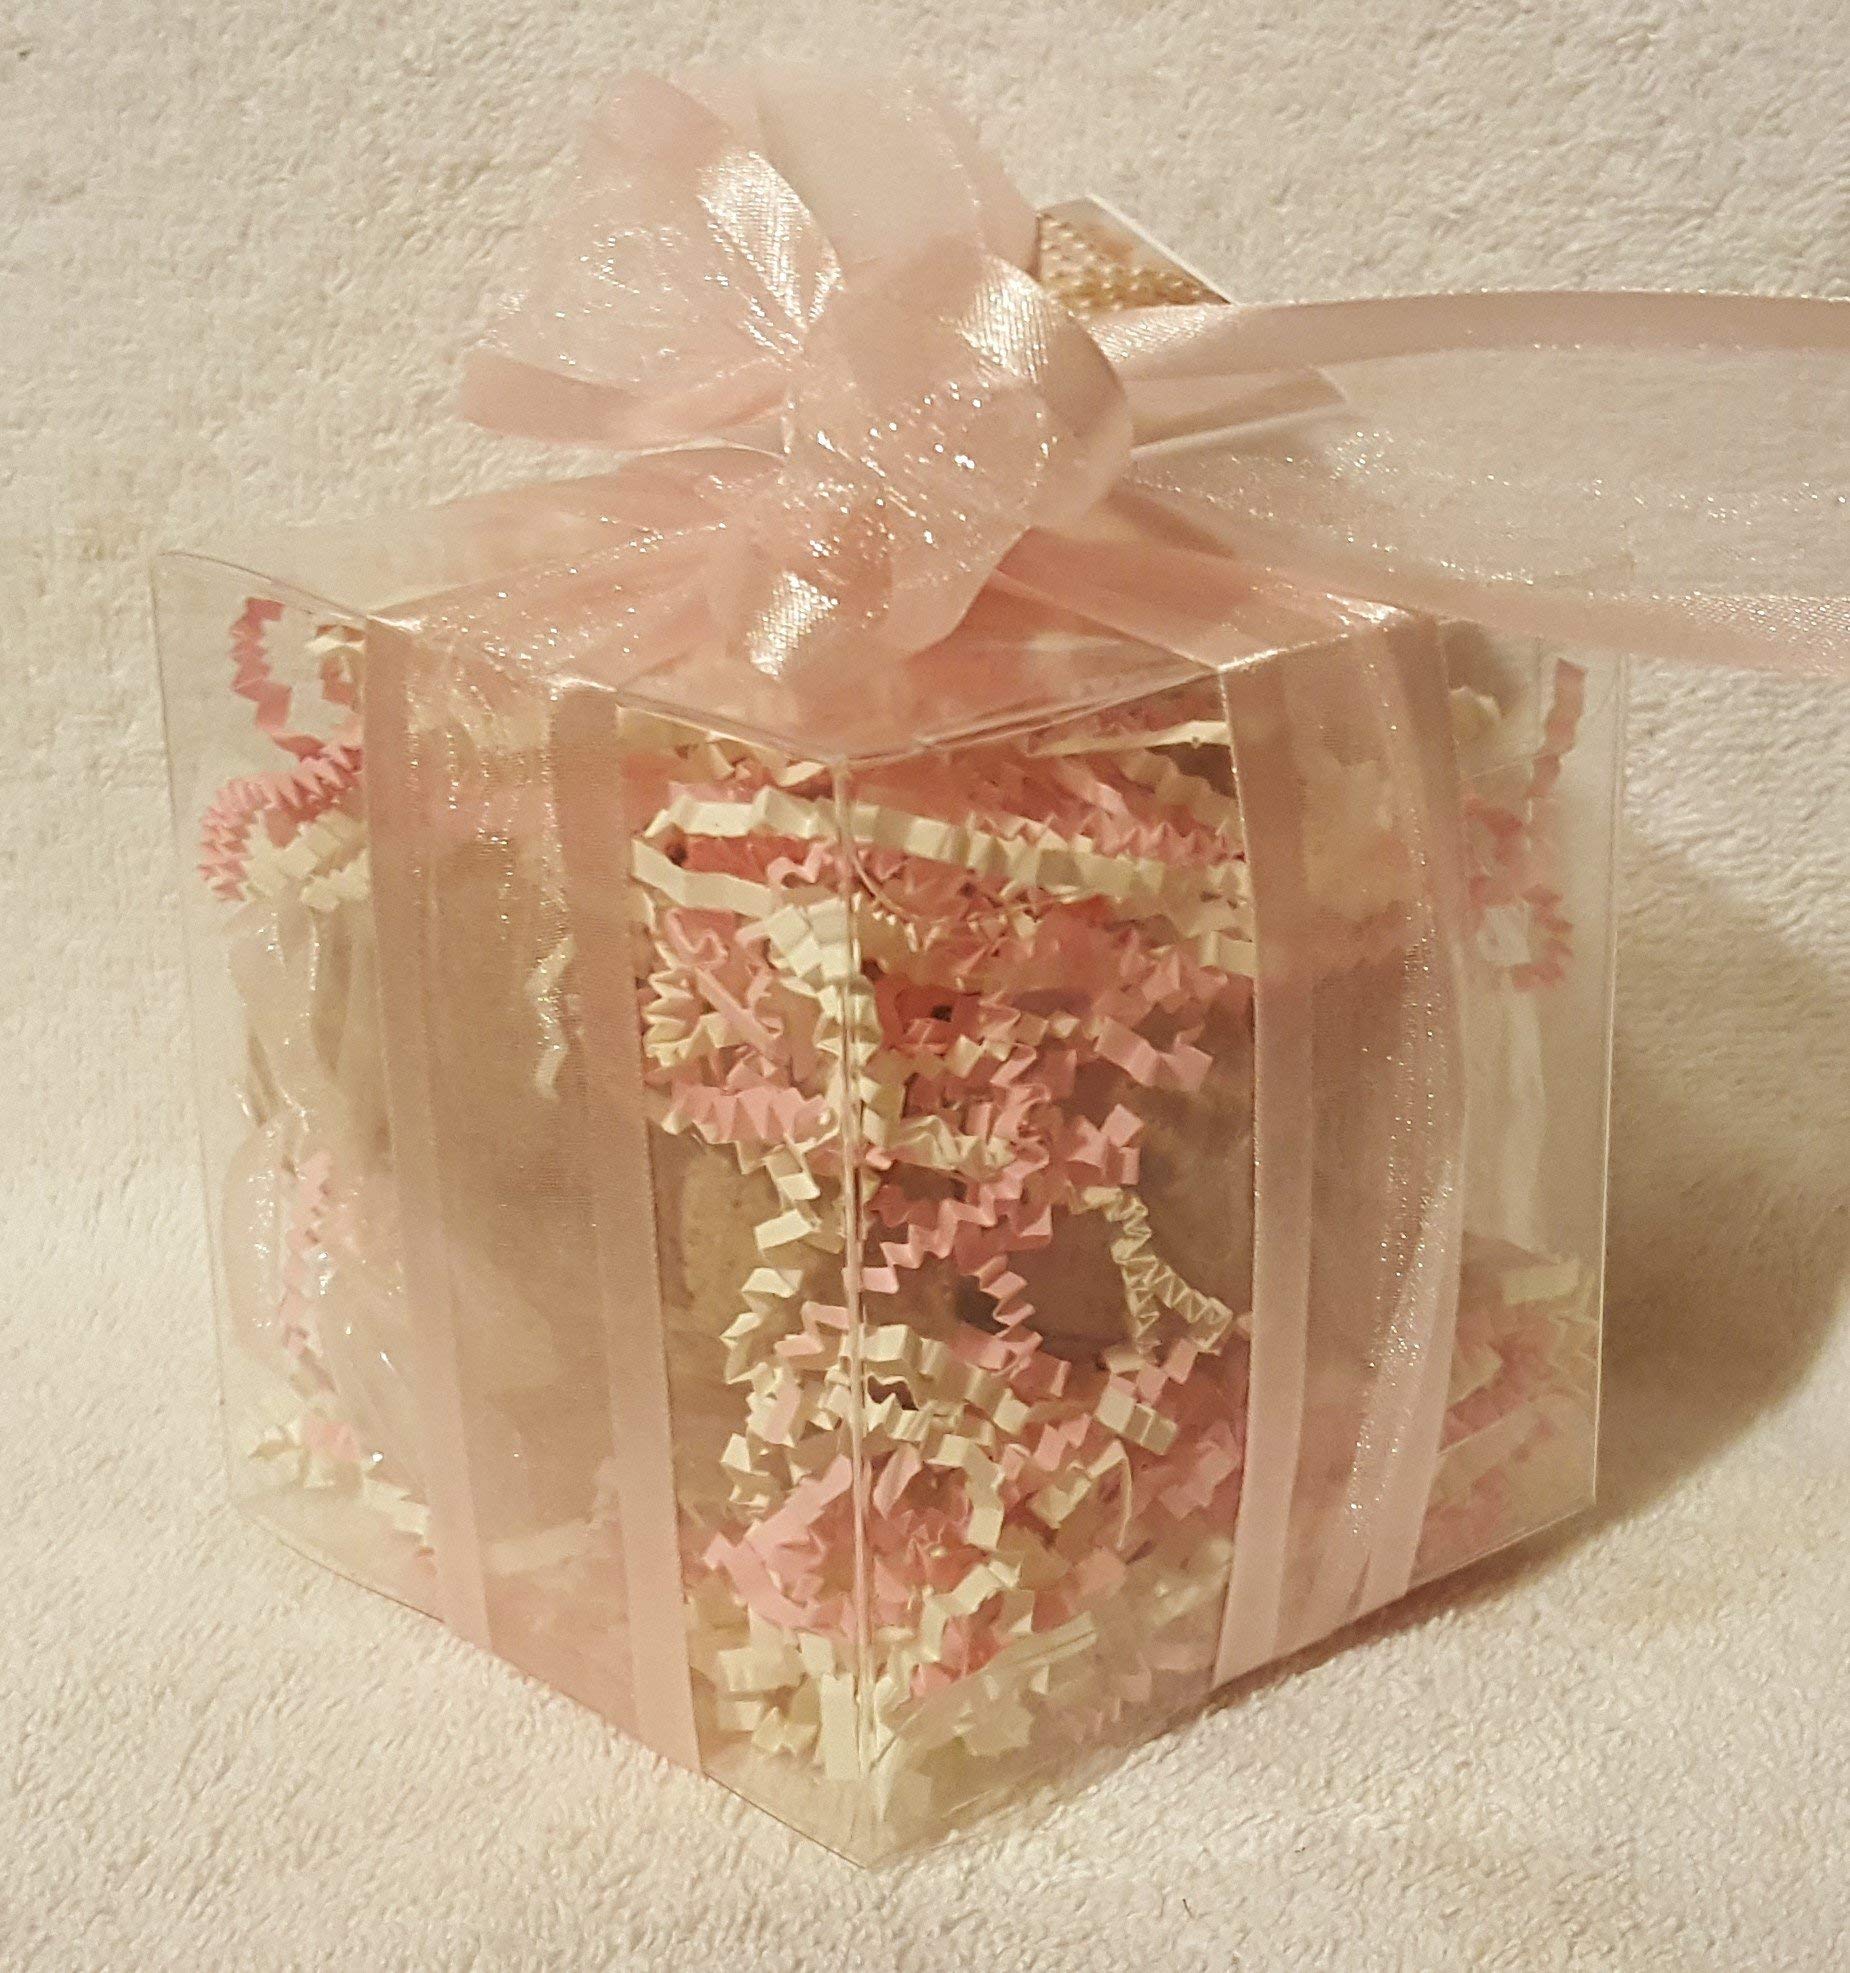 Spa Pure Vanilla Bath Bombs: Gift Set with 14 1 oz, ultra-moisturizing bath bombs, great for dry skin, makes a great gift